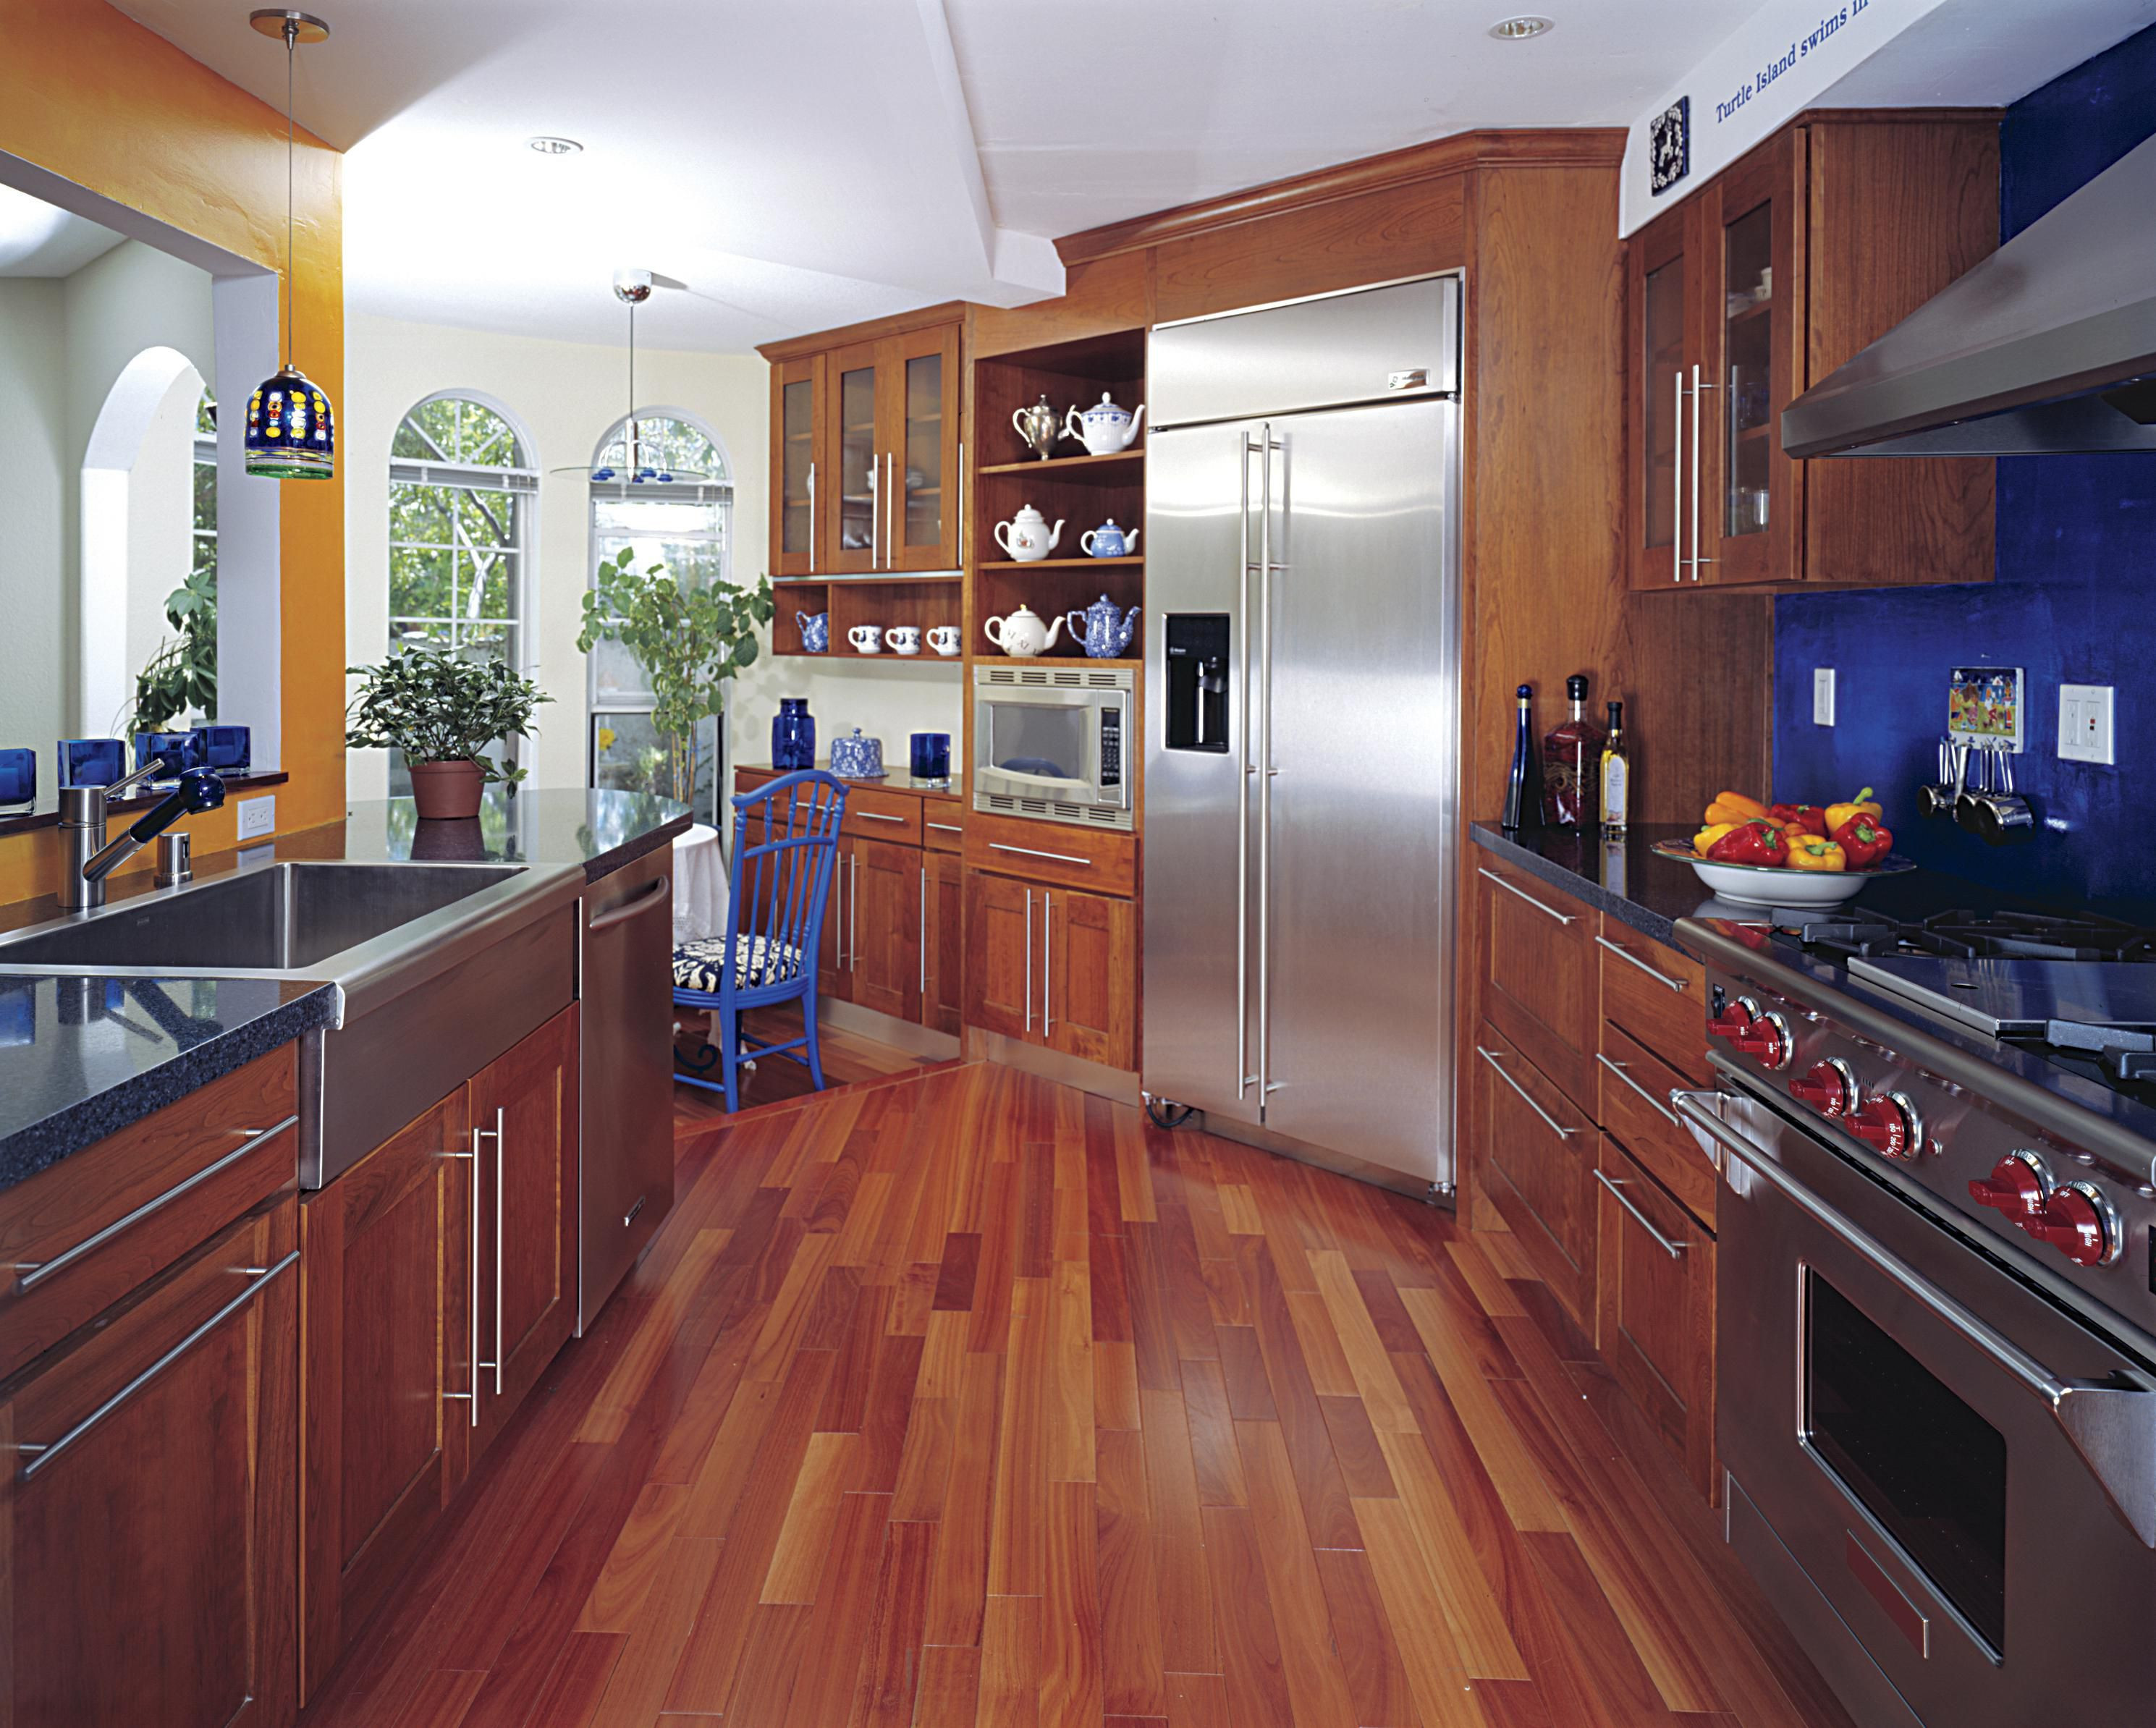 11 Ideal Hardwood Floor Stain Colors 2024 free download hardwood floor stain colors of hardwood floor in a kitchen is this allowed for 186828472 56a49f3a5f9b58b7d0d7e142